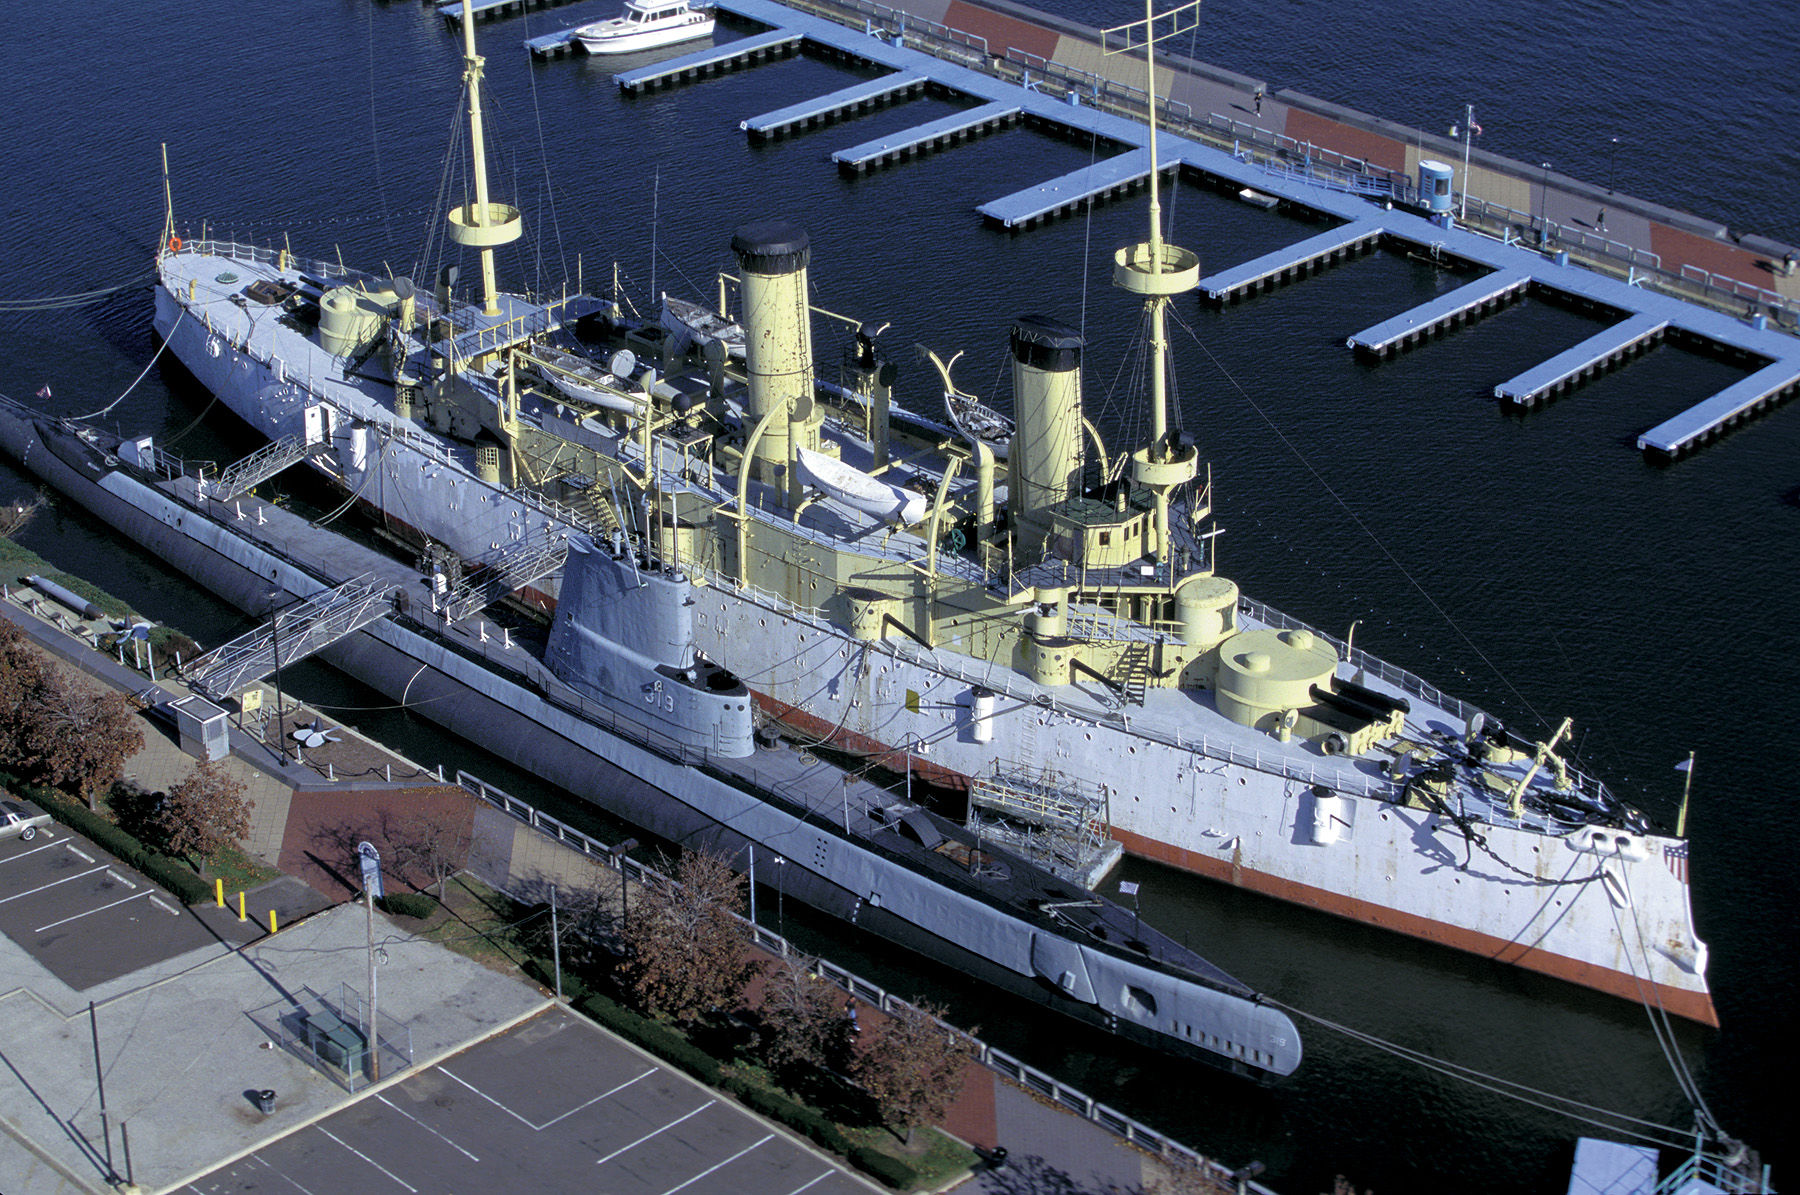 At Philadelphia's Independence Seaport Museum, visitors can explore the cruiser Olympia and WWI submarine Becuna.